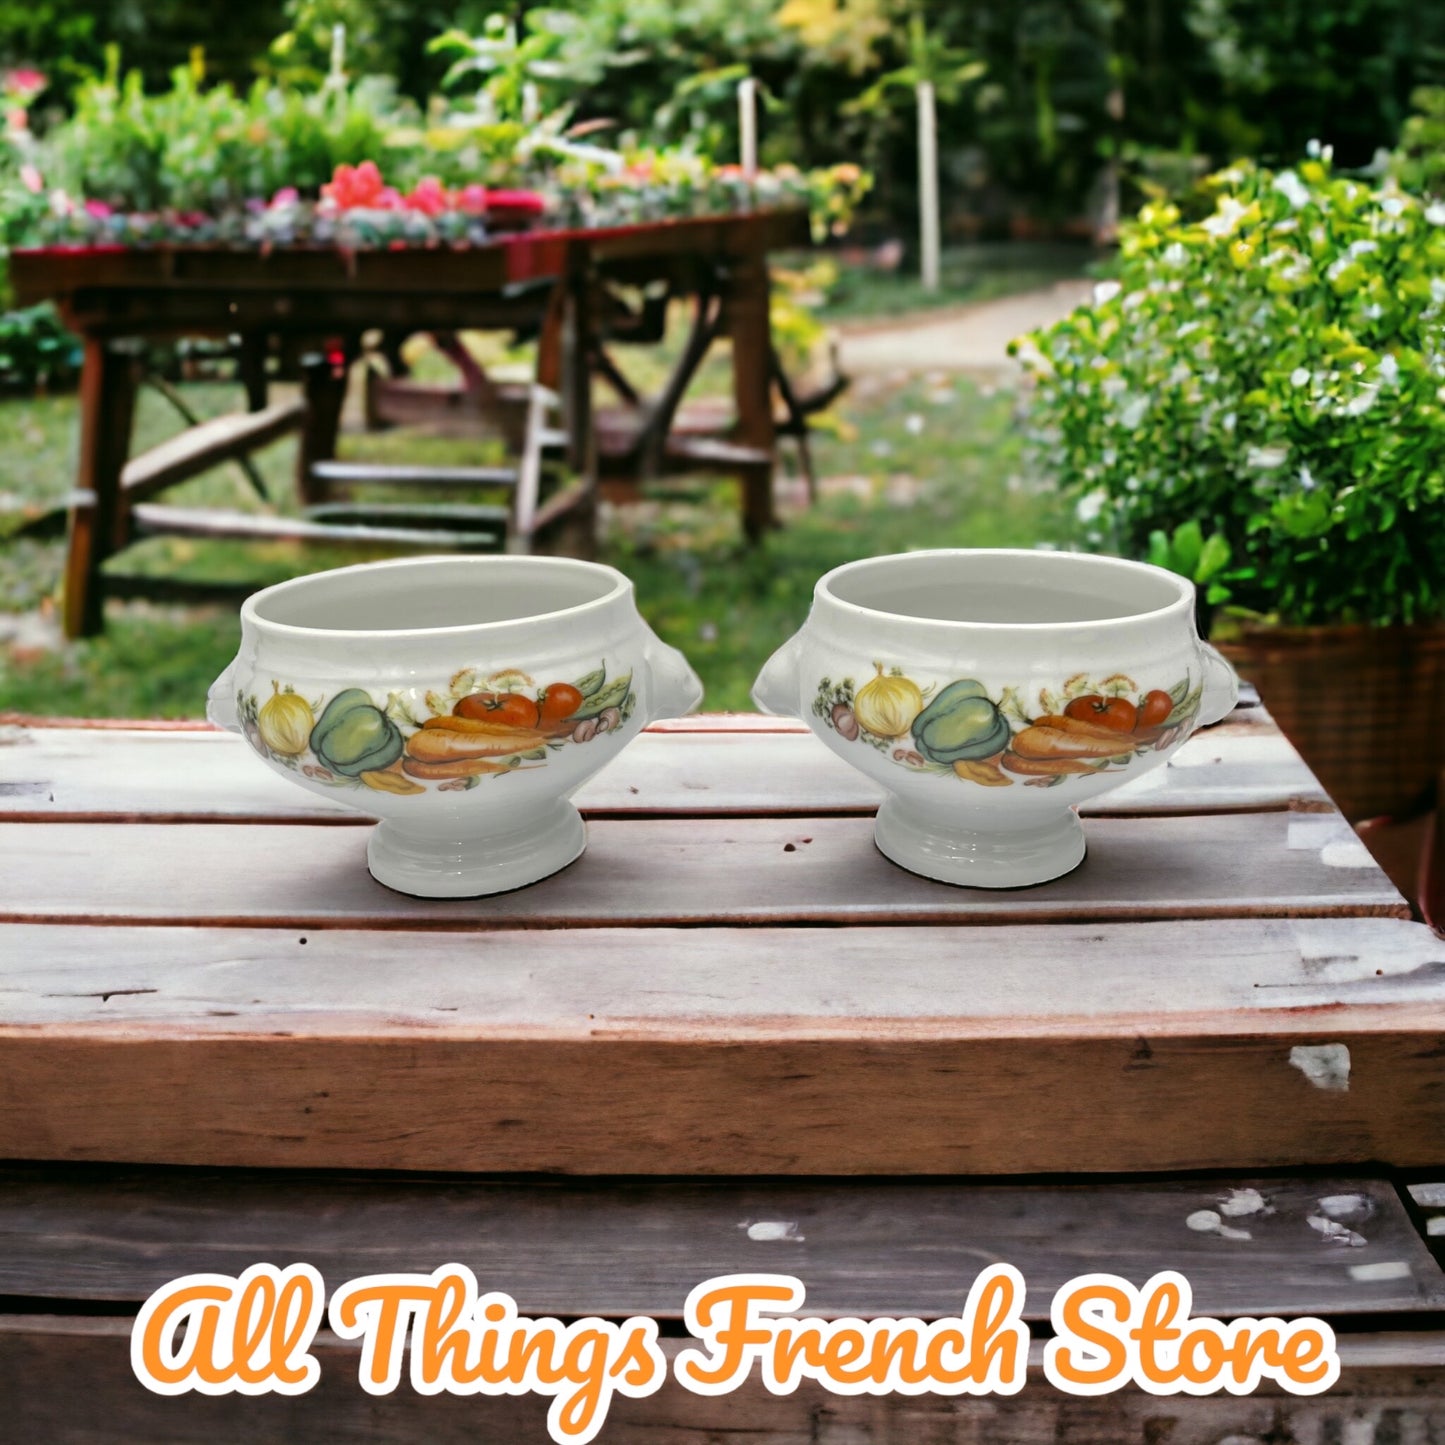 image pair of German traditional soup bowls on a rustic wooden table